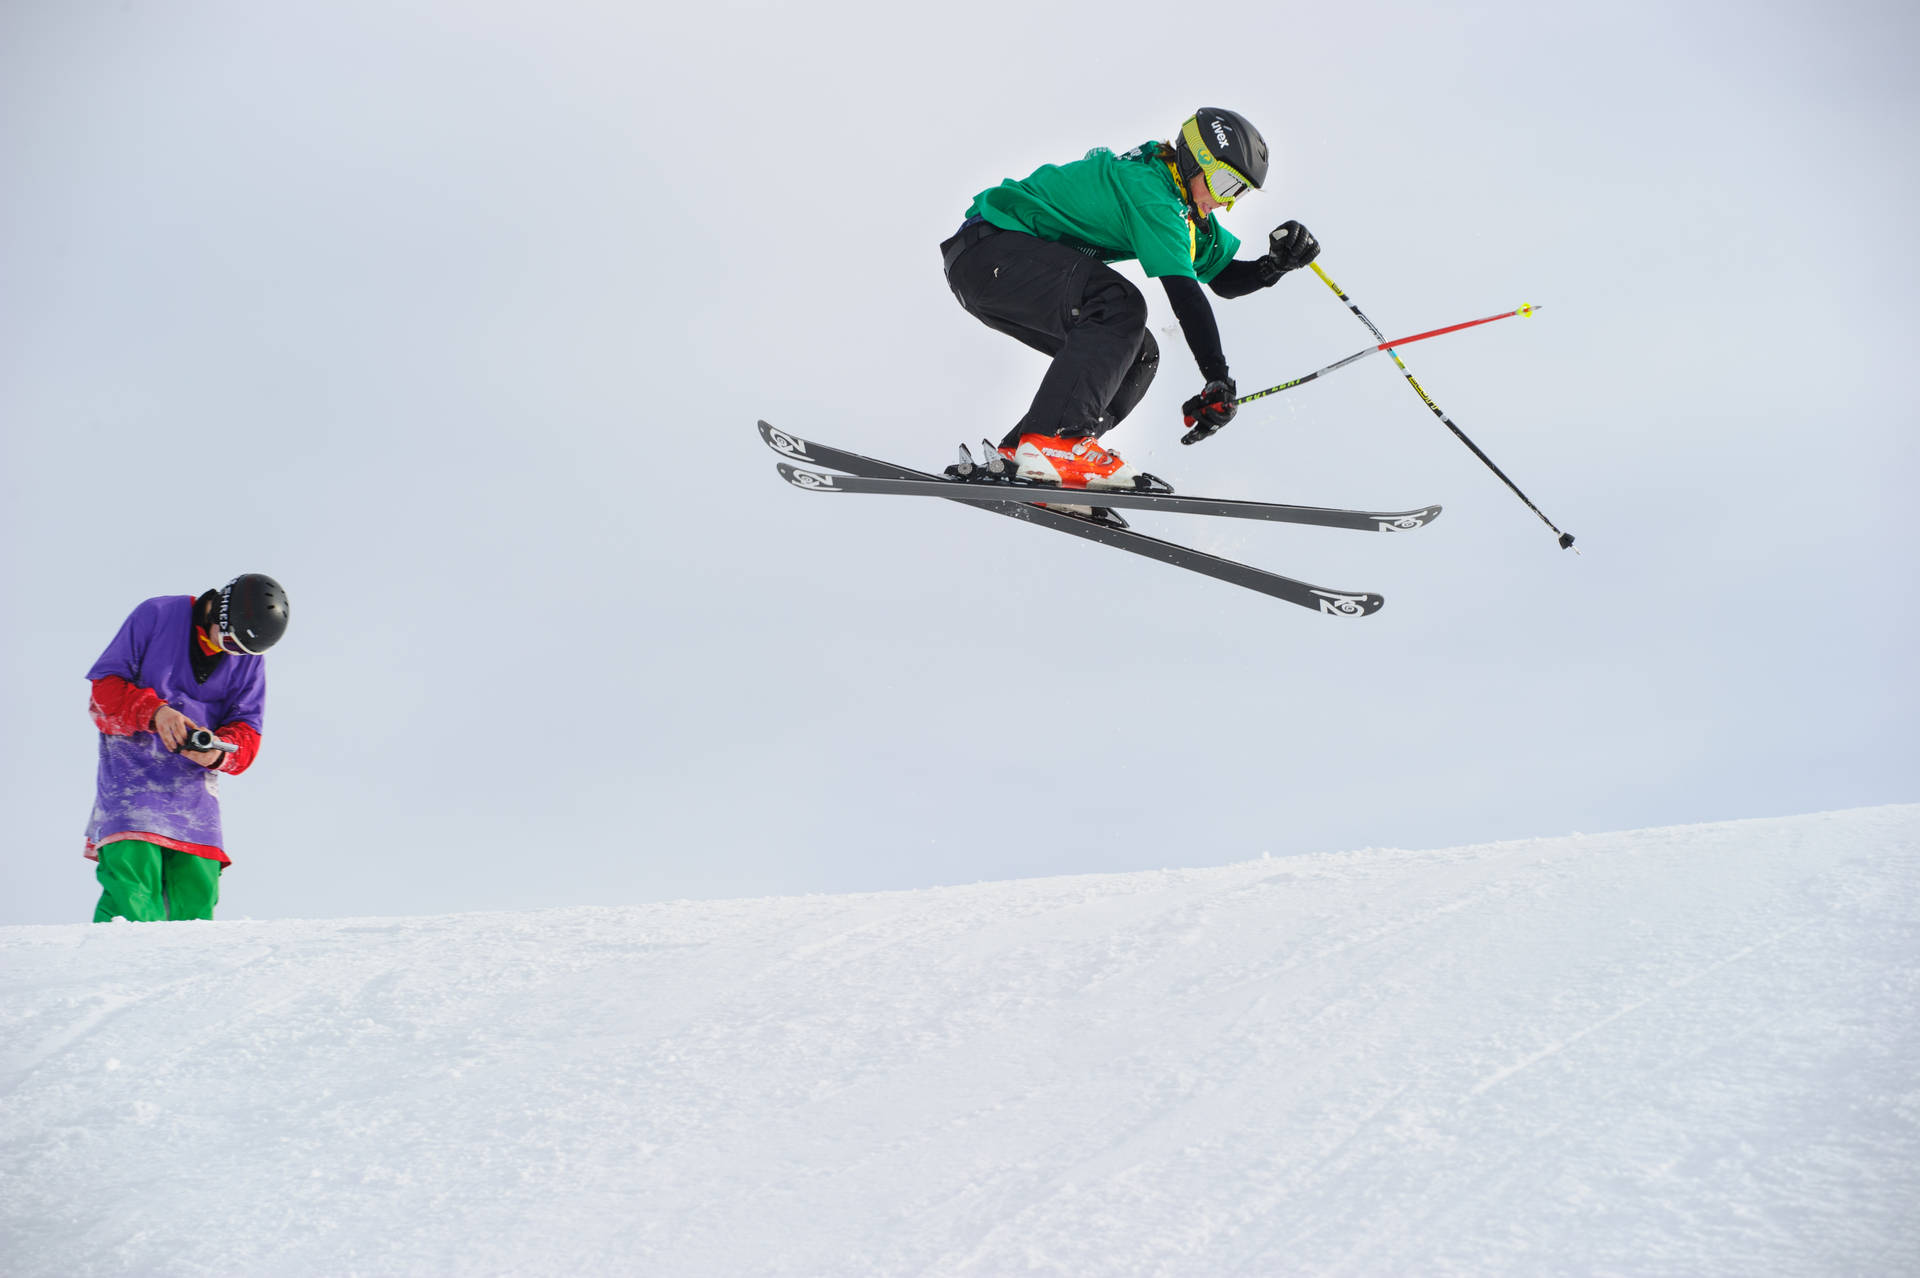 Freestyle Skiing In Snow Background